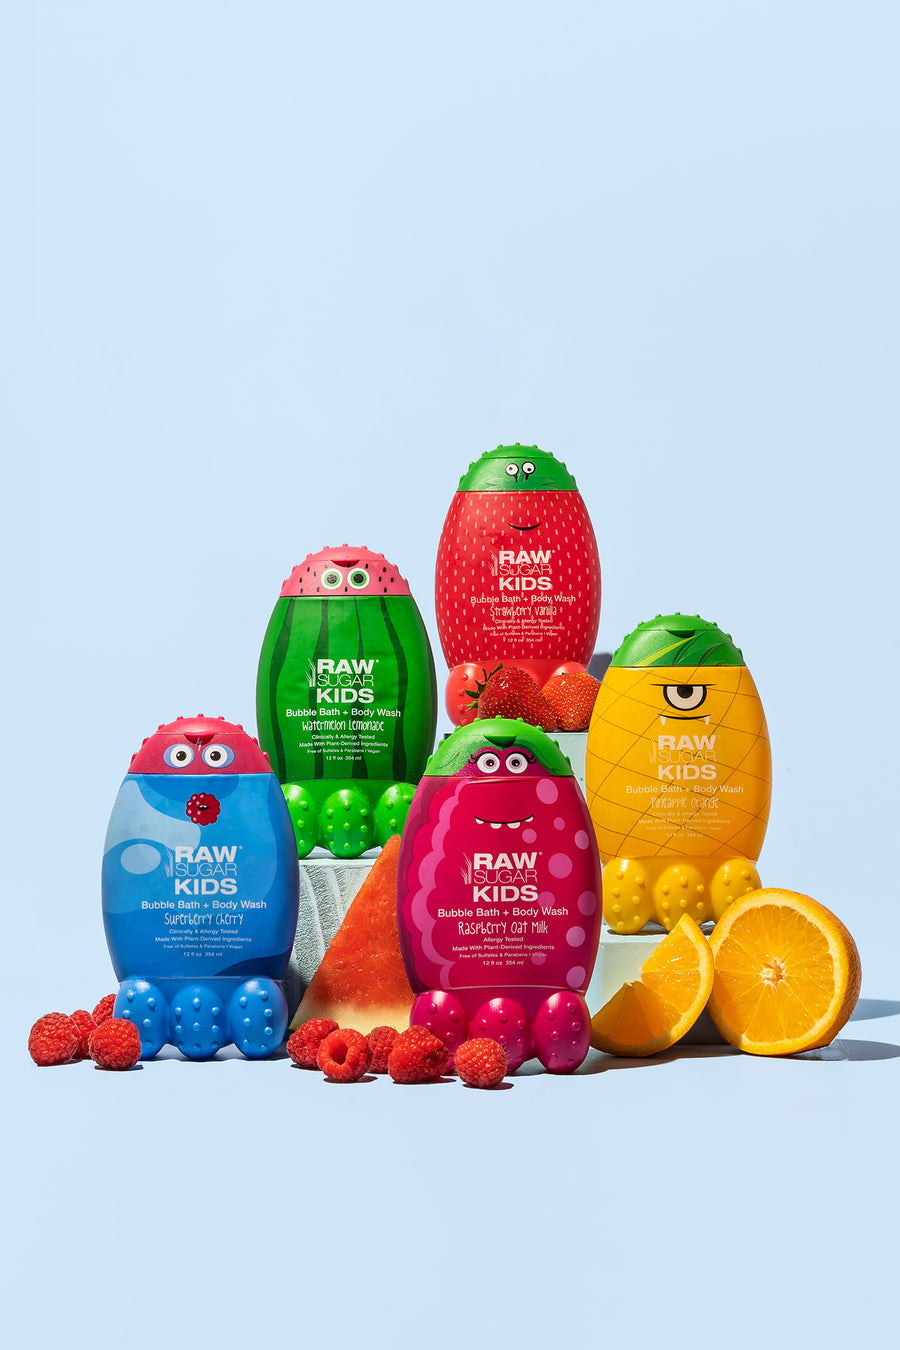 Group of all 5 colorful Raw Sugar Kids Bubble Bath Monsters with fresh raspberries, orange slice/half along with fresh watermelon